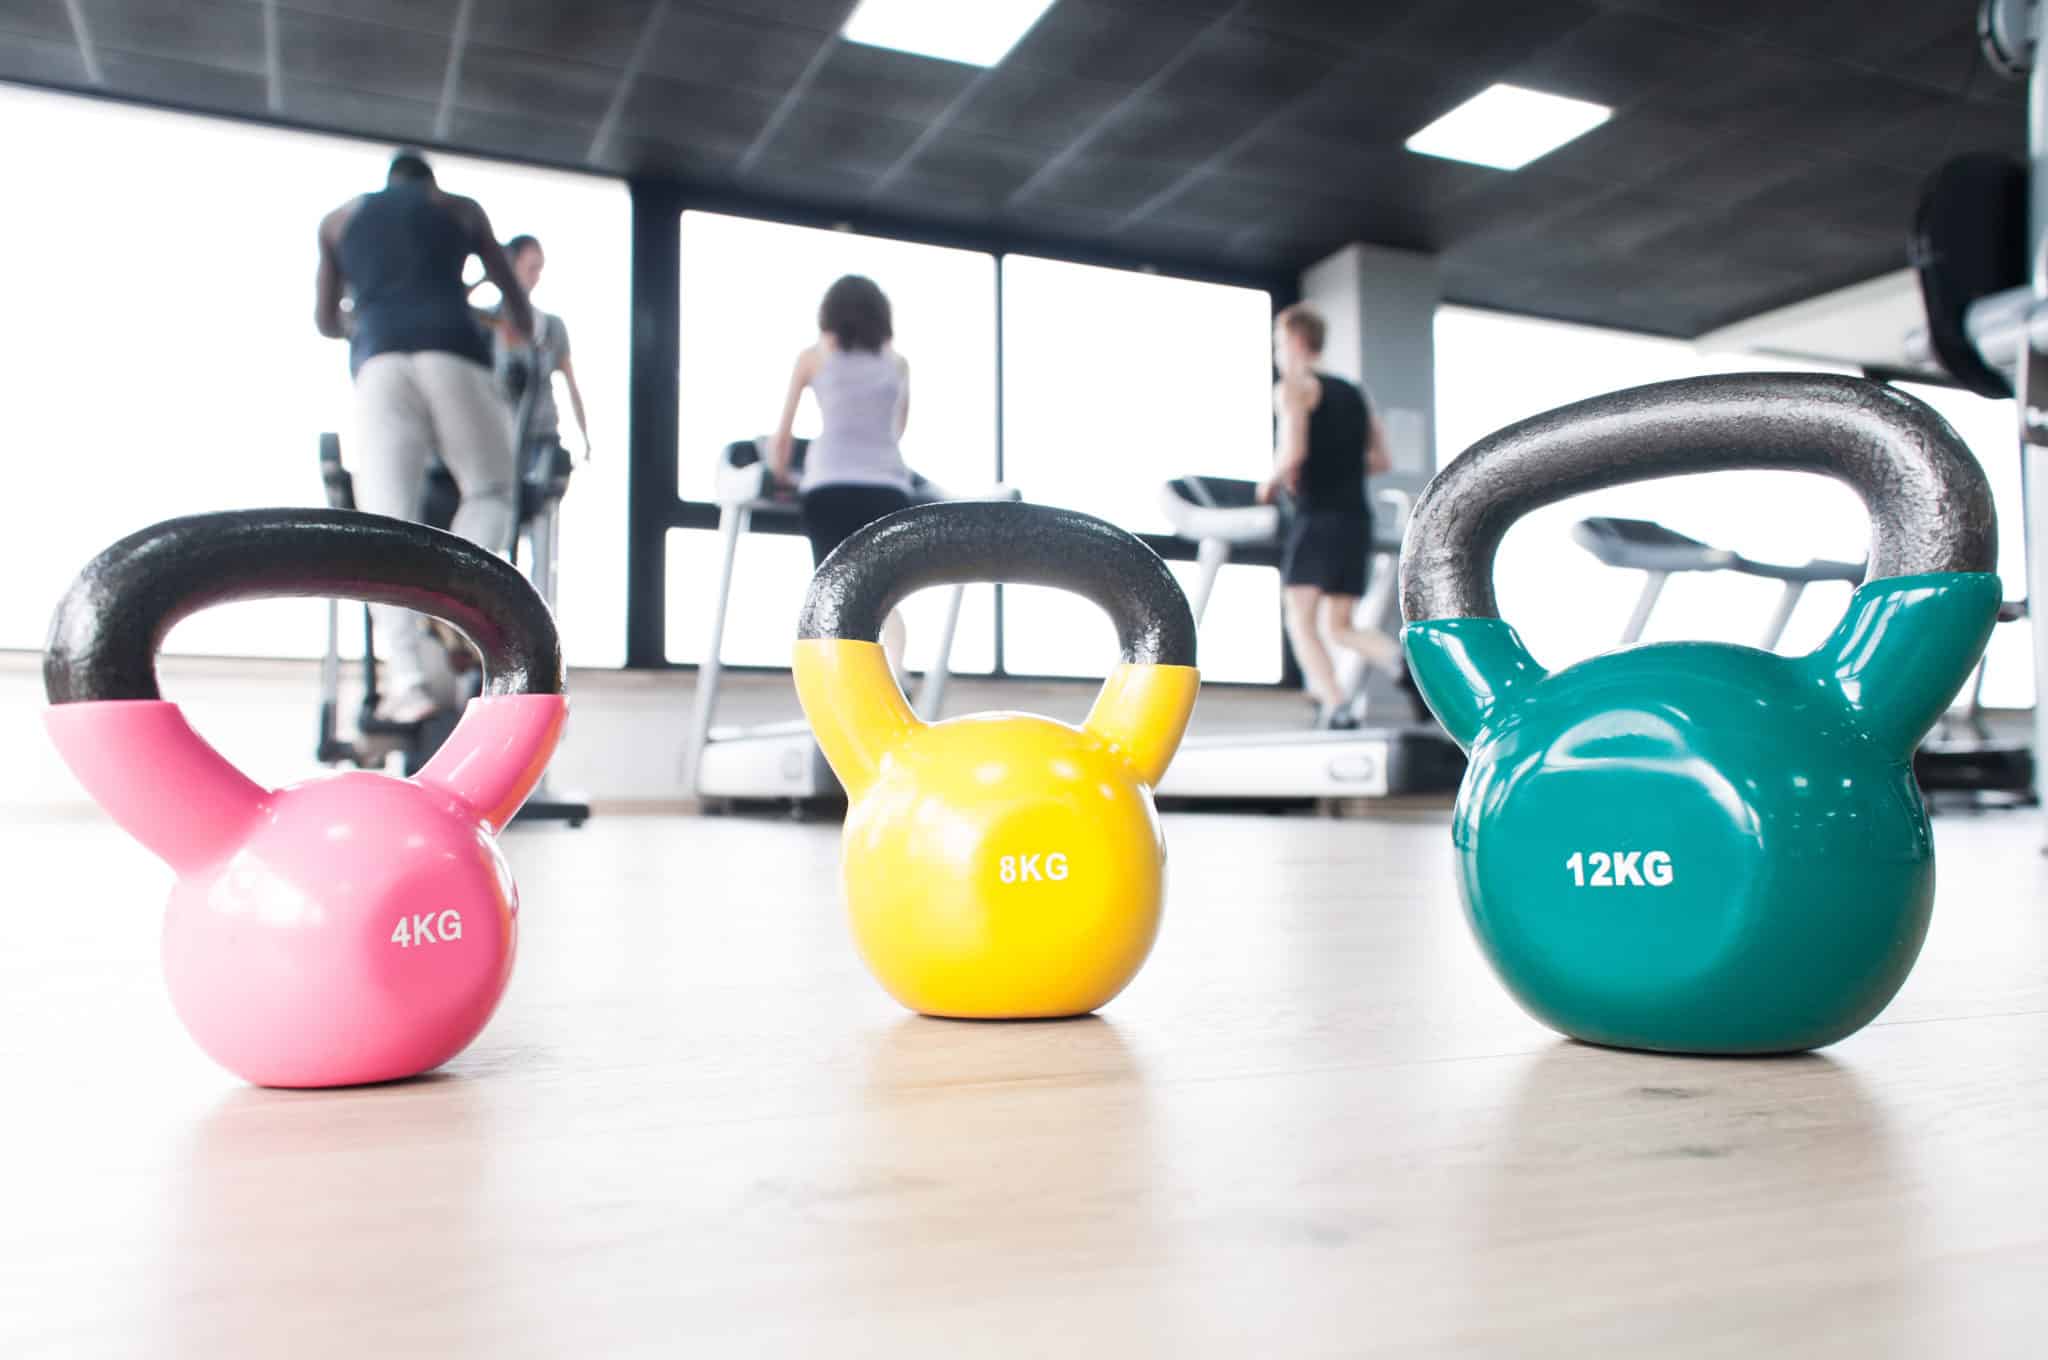 Learn the basics of kettle bell workouts and give it a try with our free 10-minute workout.